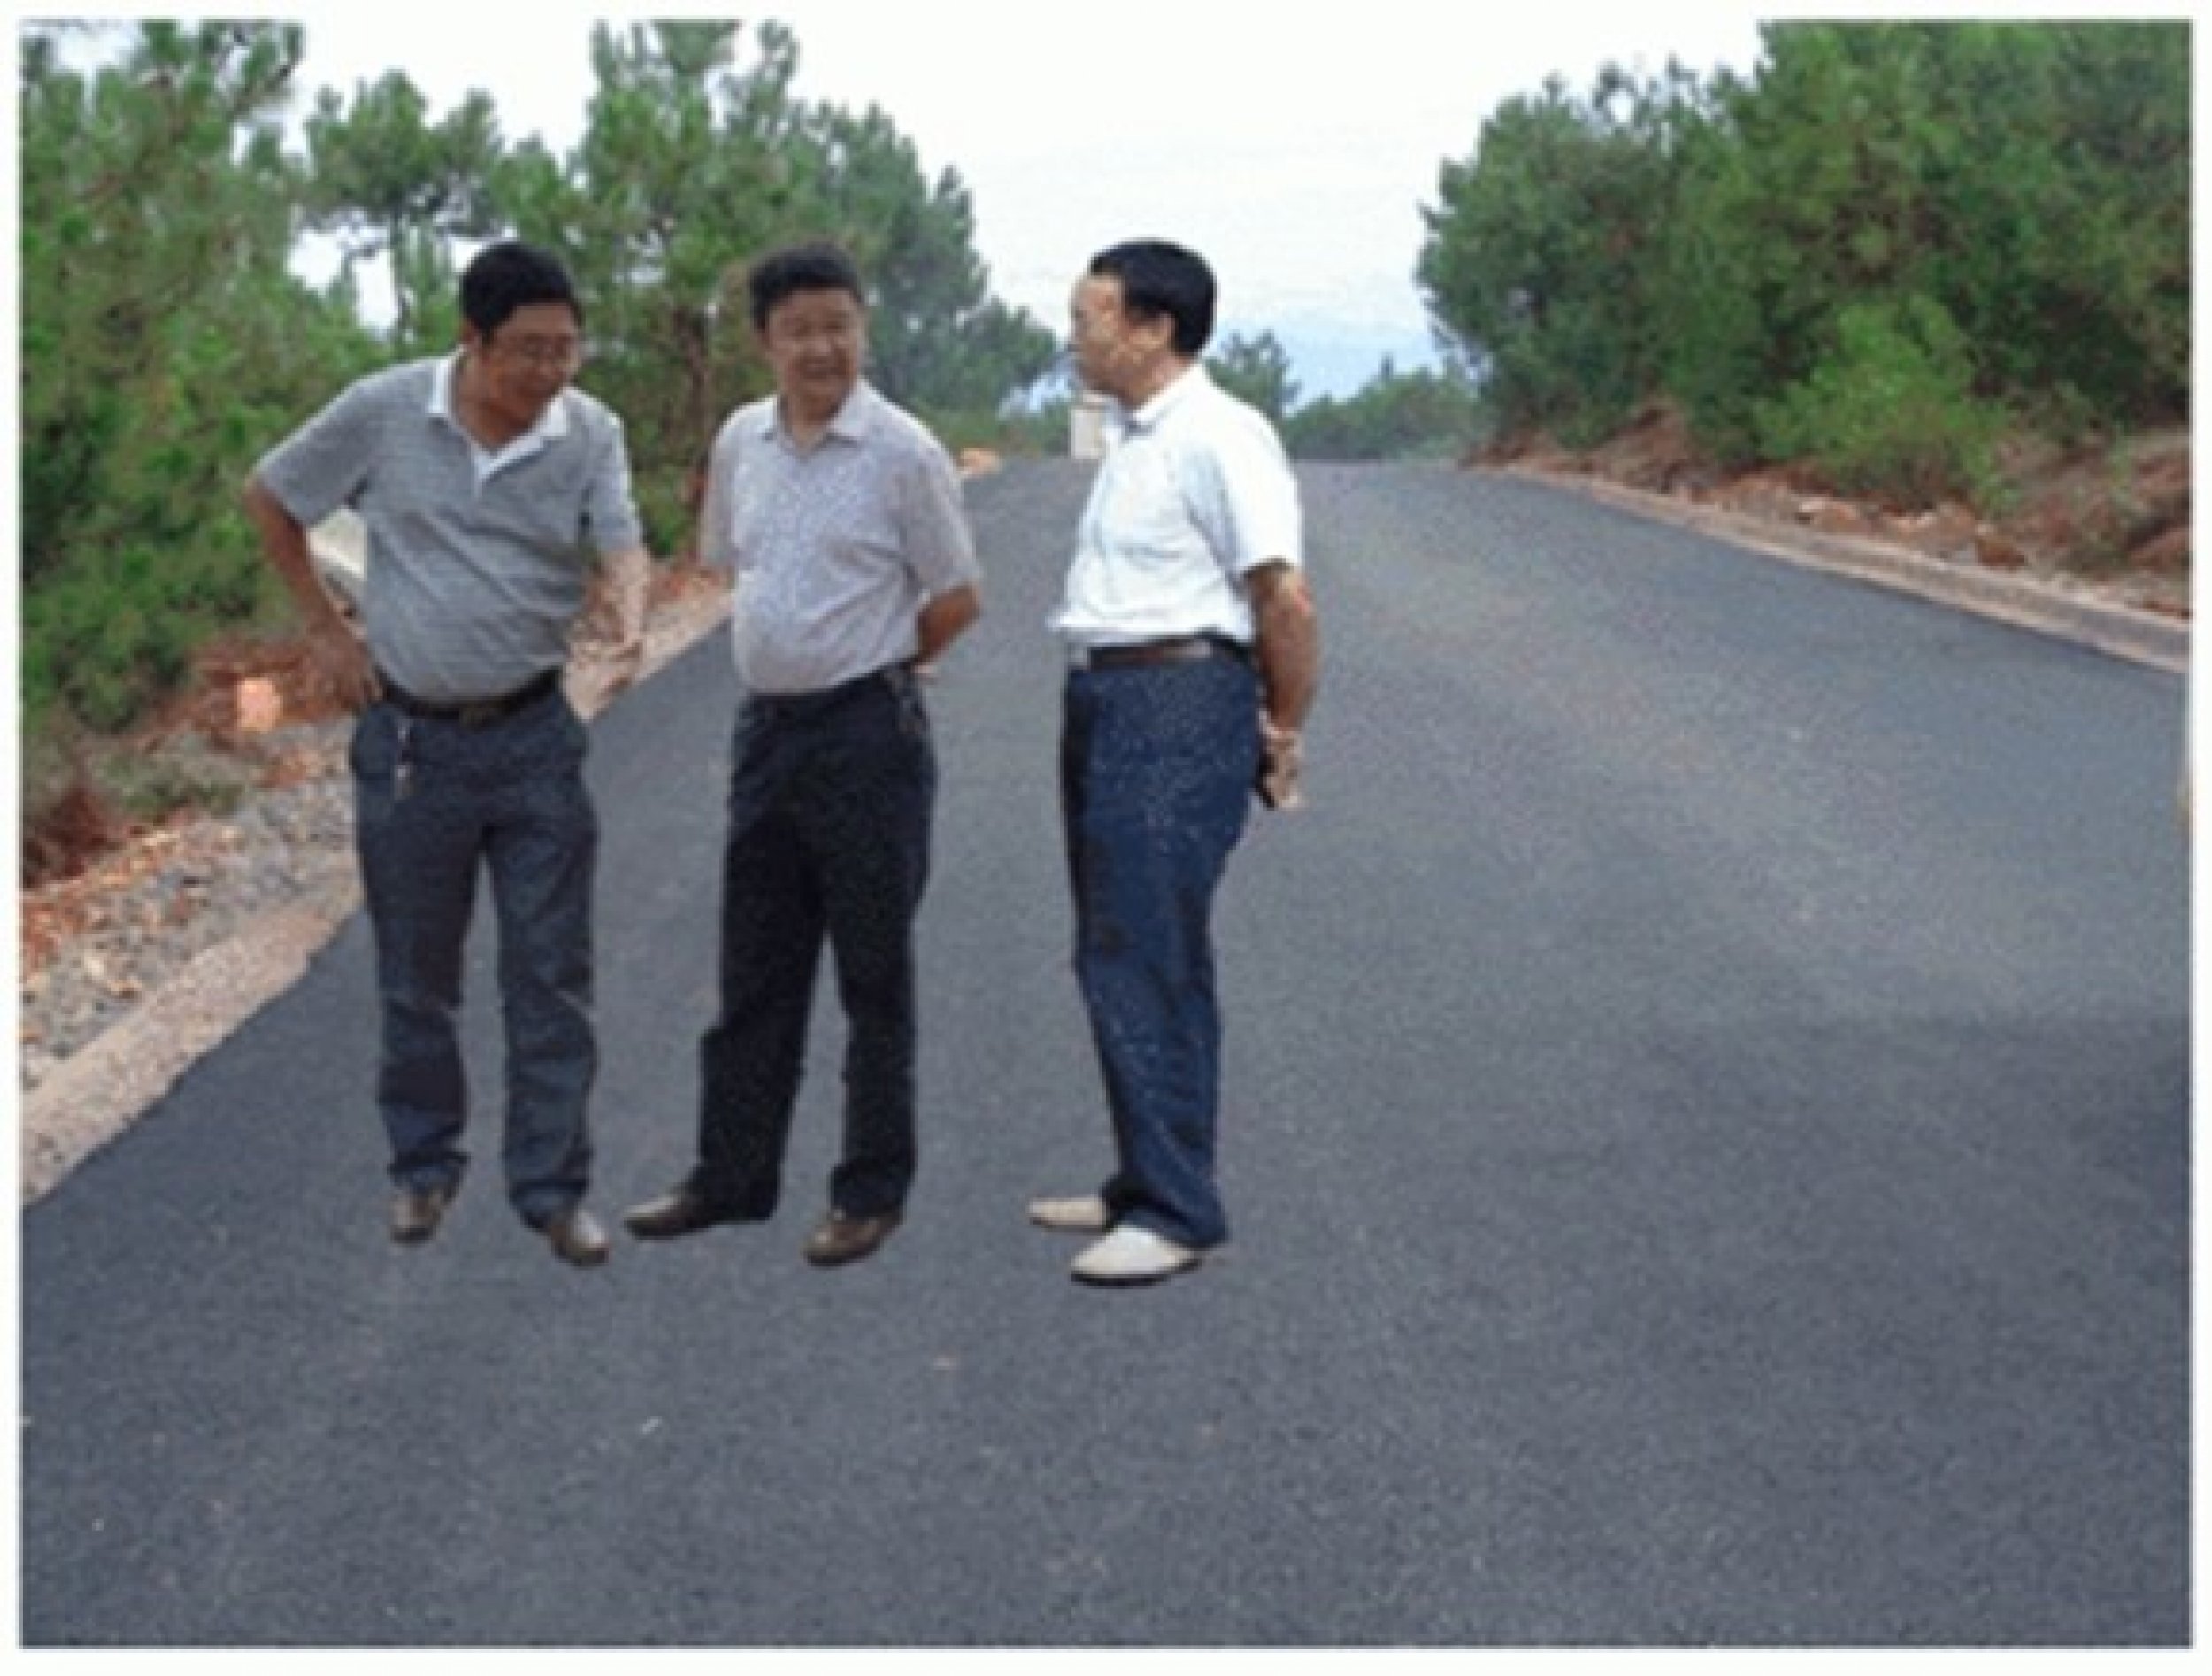 The image the Huili County Government posted on their website.